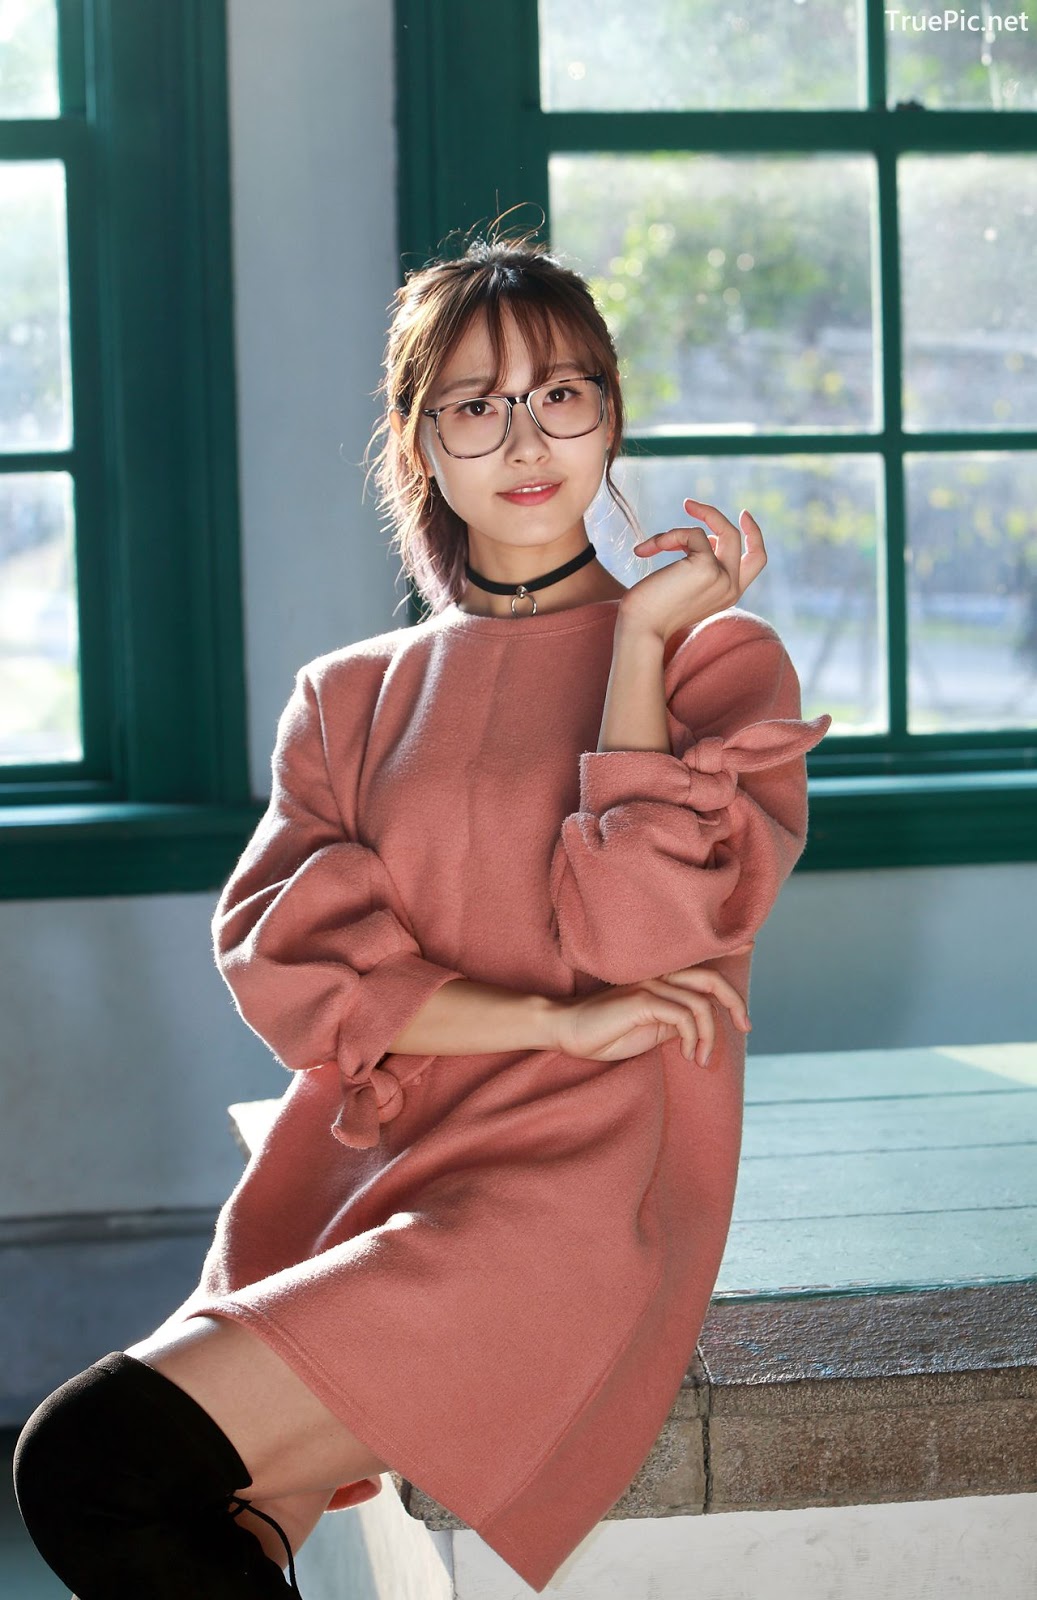 Image-Taiwanese-Model-郭思敏-Pure-And-Gorgeous-Girl-In-Pink-Sweater-Dress-TruePic.net- Picture-28